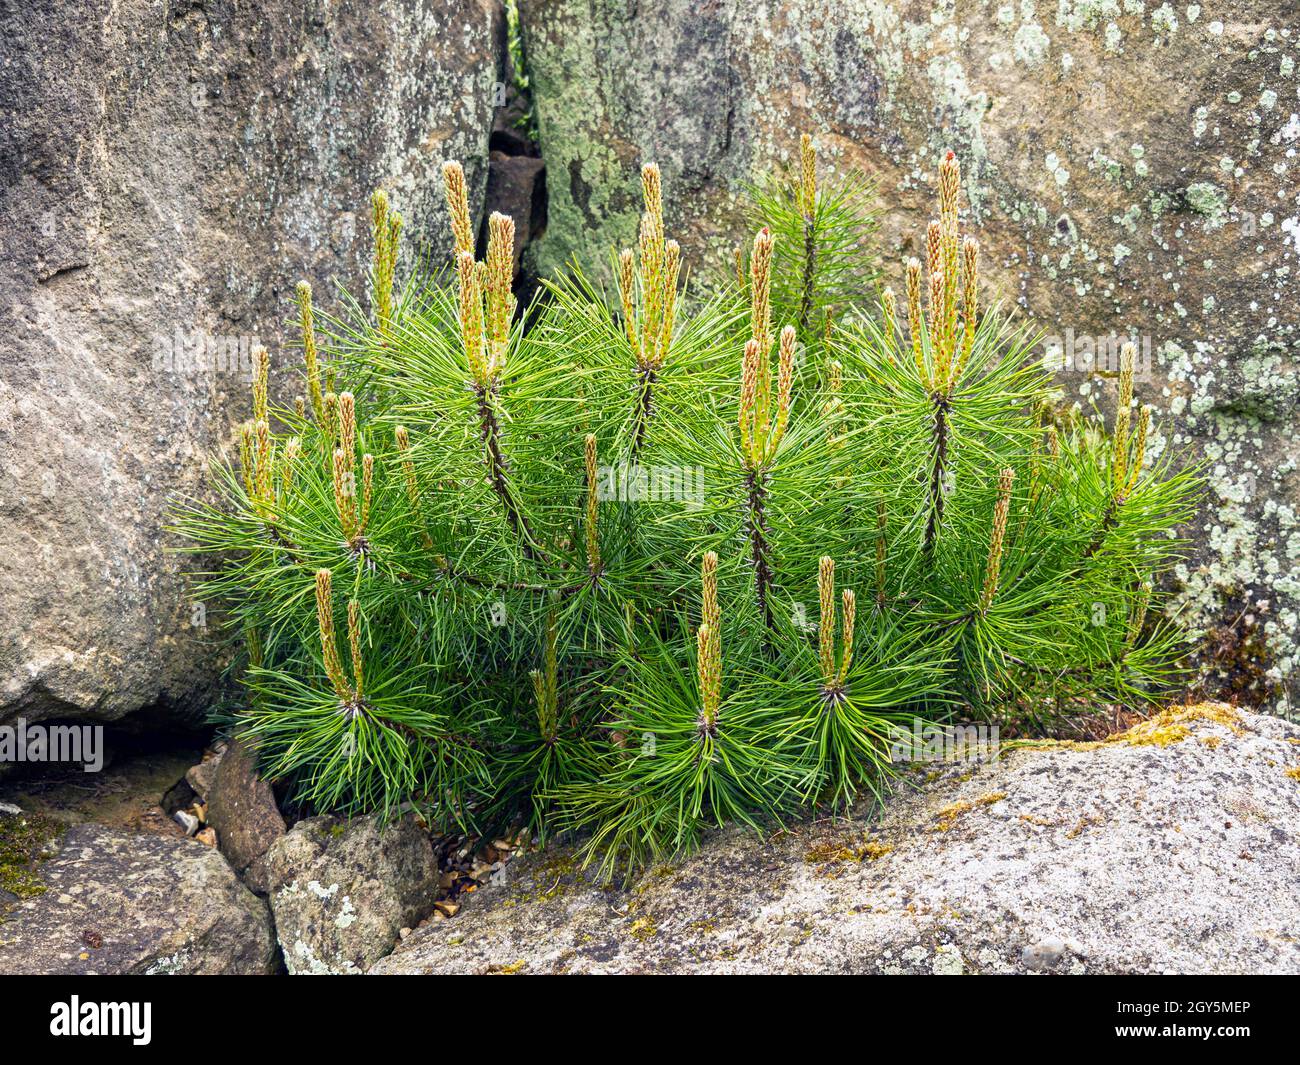 New spring growth on a dwarf pine tree in a rock garden Stock Photo